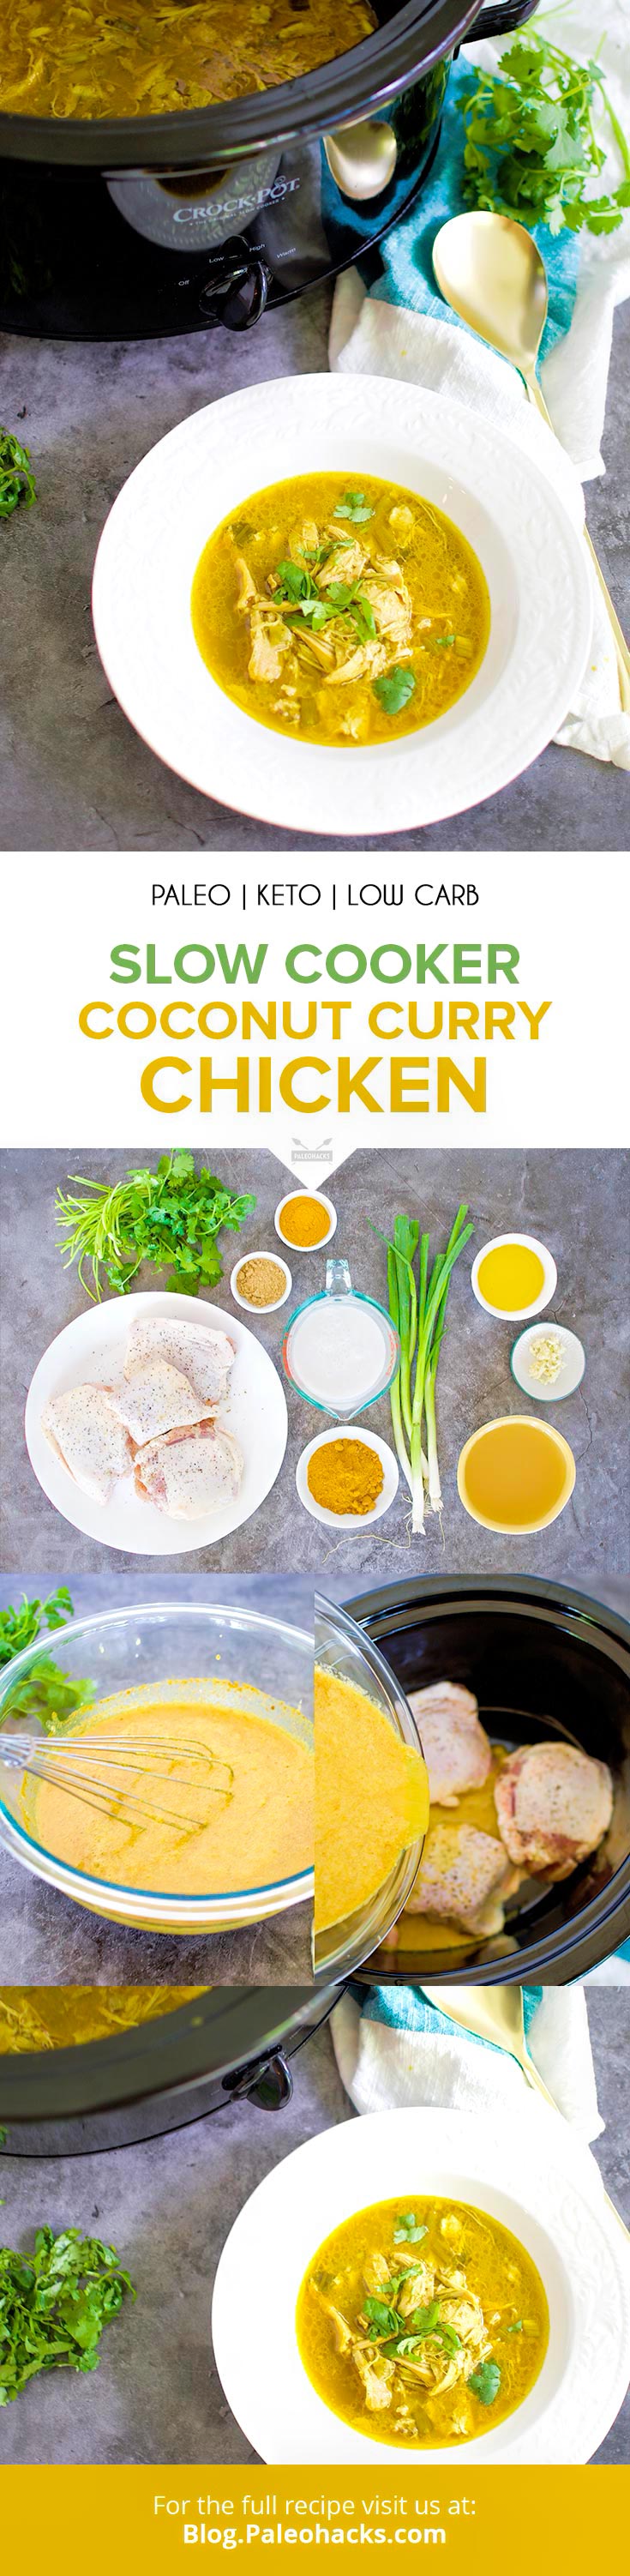 Whip up an aromatic, flavorful pot of keto coconut curry chicken with just 5 minutes of prep. This is the easiest chicken curry you'll ever make.